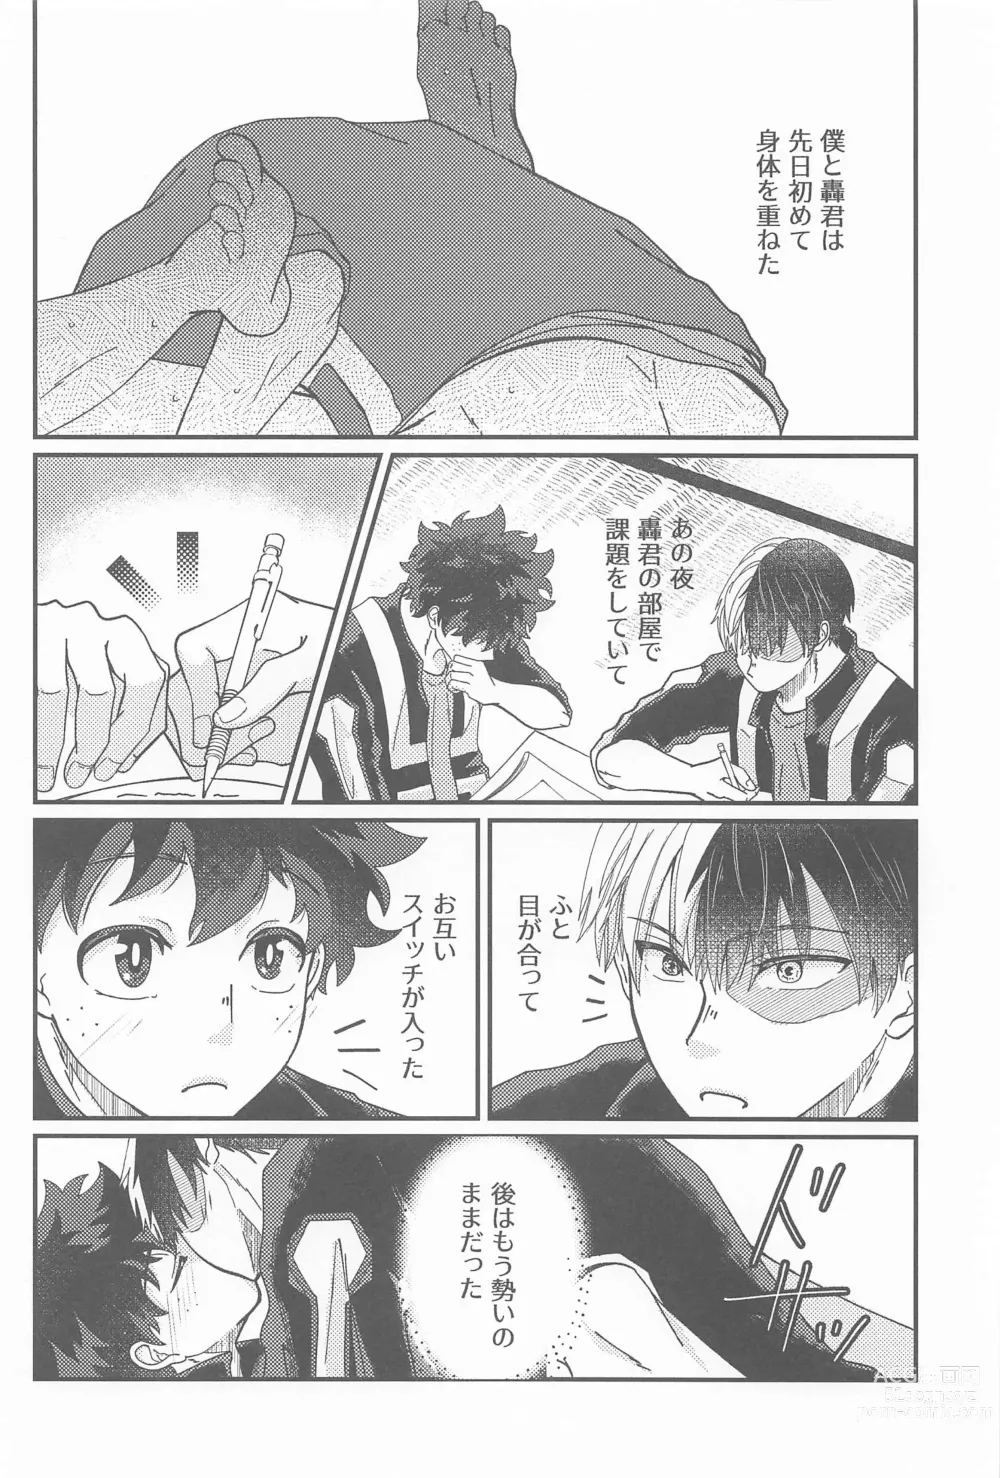 Page 3 of doujinshi Second Sweet